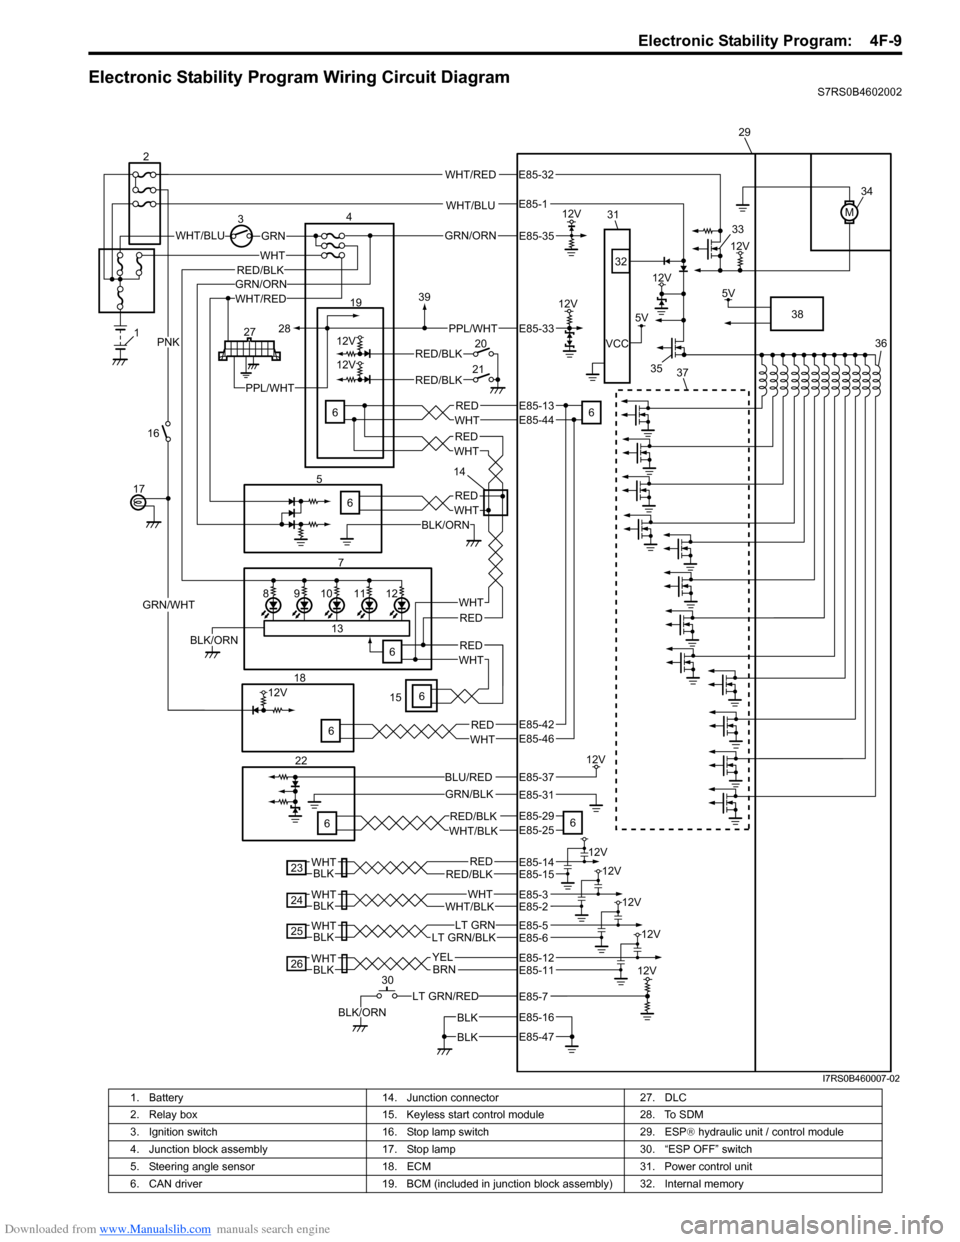 SUZUKI SWIFT 2006 2.G Service Service Manual Downloaded from www.Manualslib.com manuals search engine Electronic Stability Program:  4F-9
Electronic Stability Program Wiring Circuit DiagramS7RS0B4602002
WHT/BLU
WHT/BLUGRN
M
12V3
12V
5V
12V
VCC
W